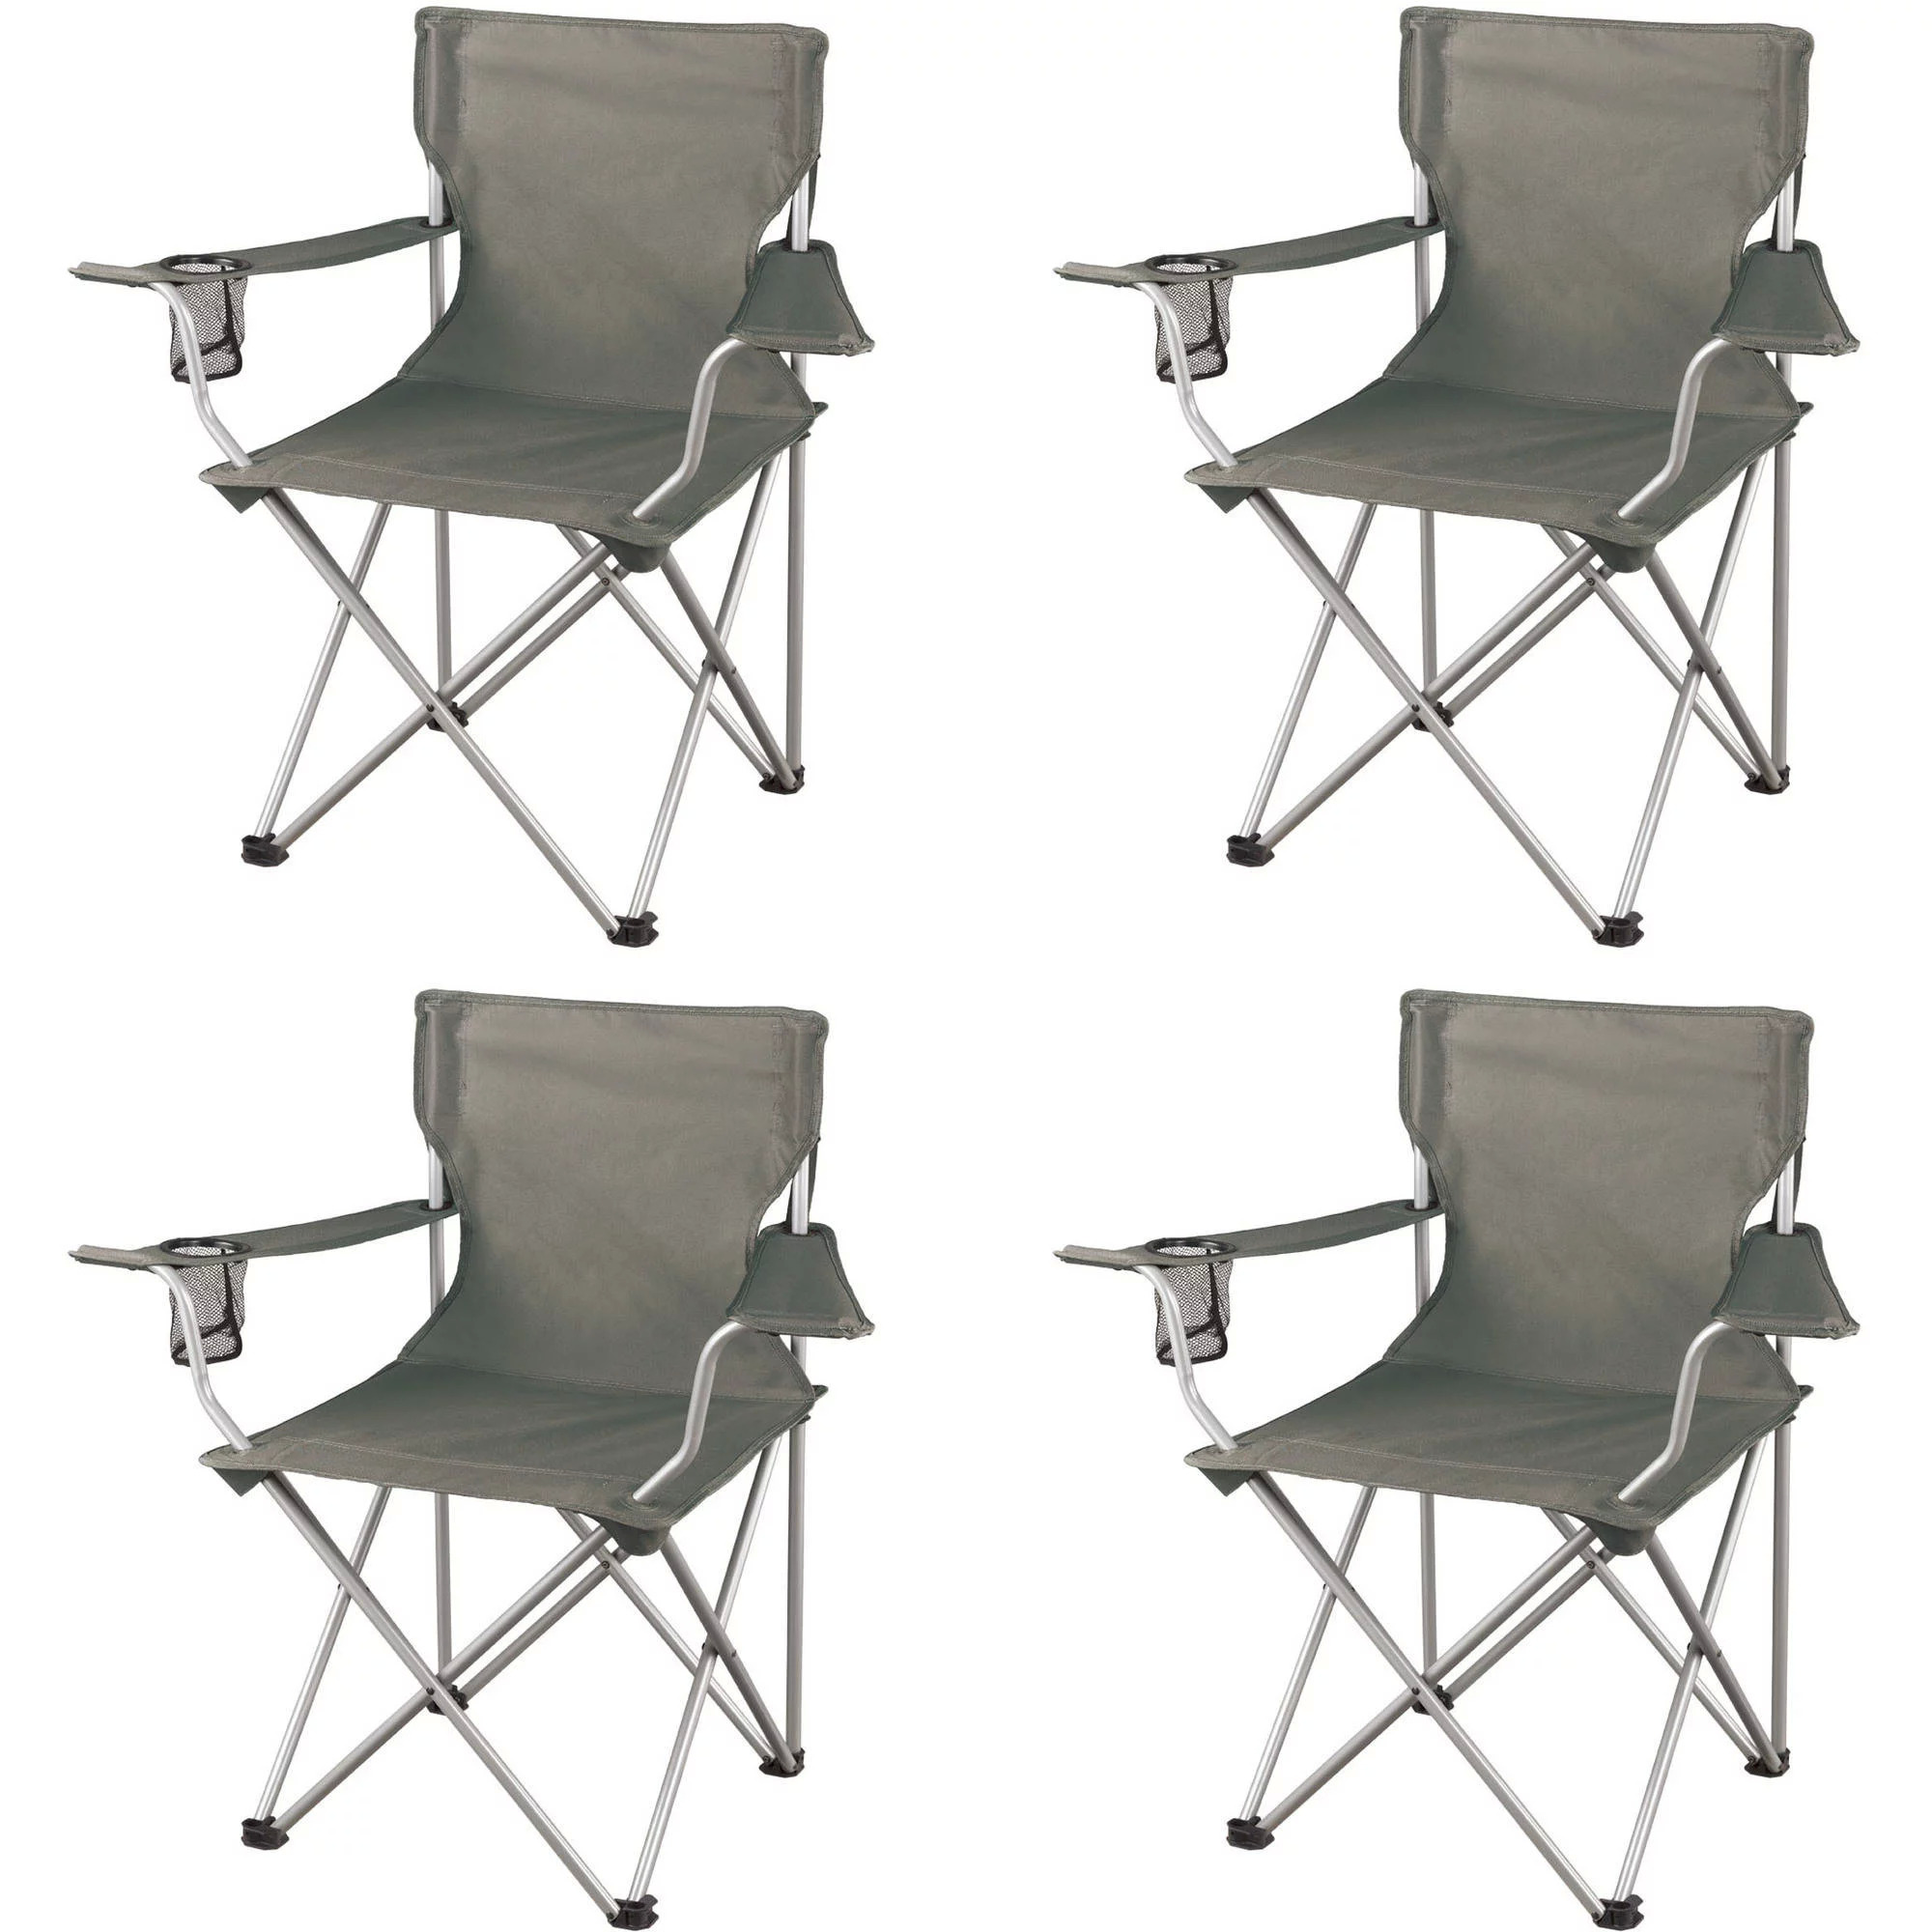 4-Pack Ozark Trail Classic Folding Camp Chairs w/ Mesh Cup Holder $28 ($7 each) + Free S&H w/ Walmart+ or $35+